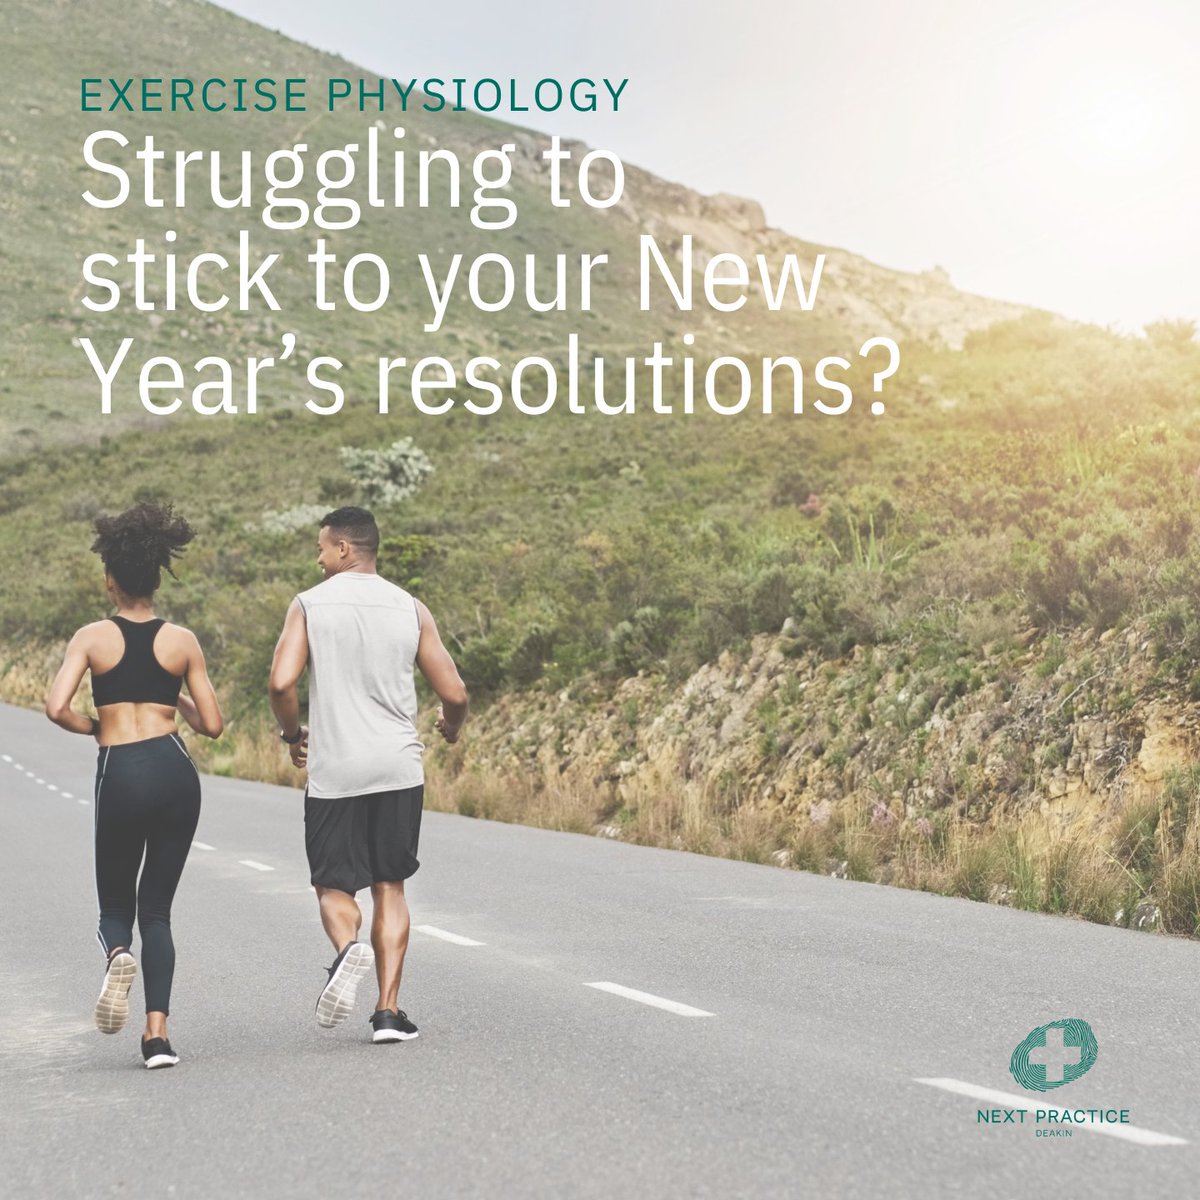 Next Practice Deakin now have an Accredited Exercise Physiologist! 
 
Book a session through our website now to identify how to fit exercise into your busy schedule. 

#NextPractice #ExercisePhysiologist